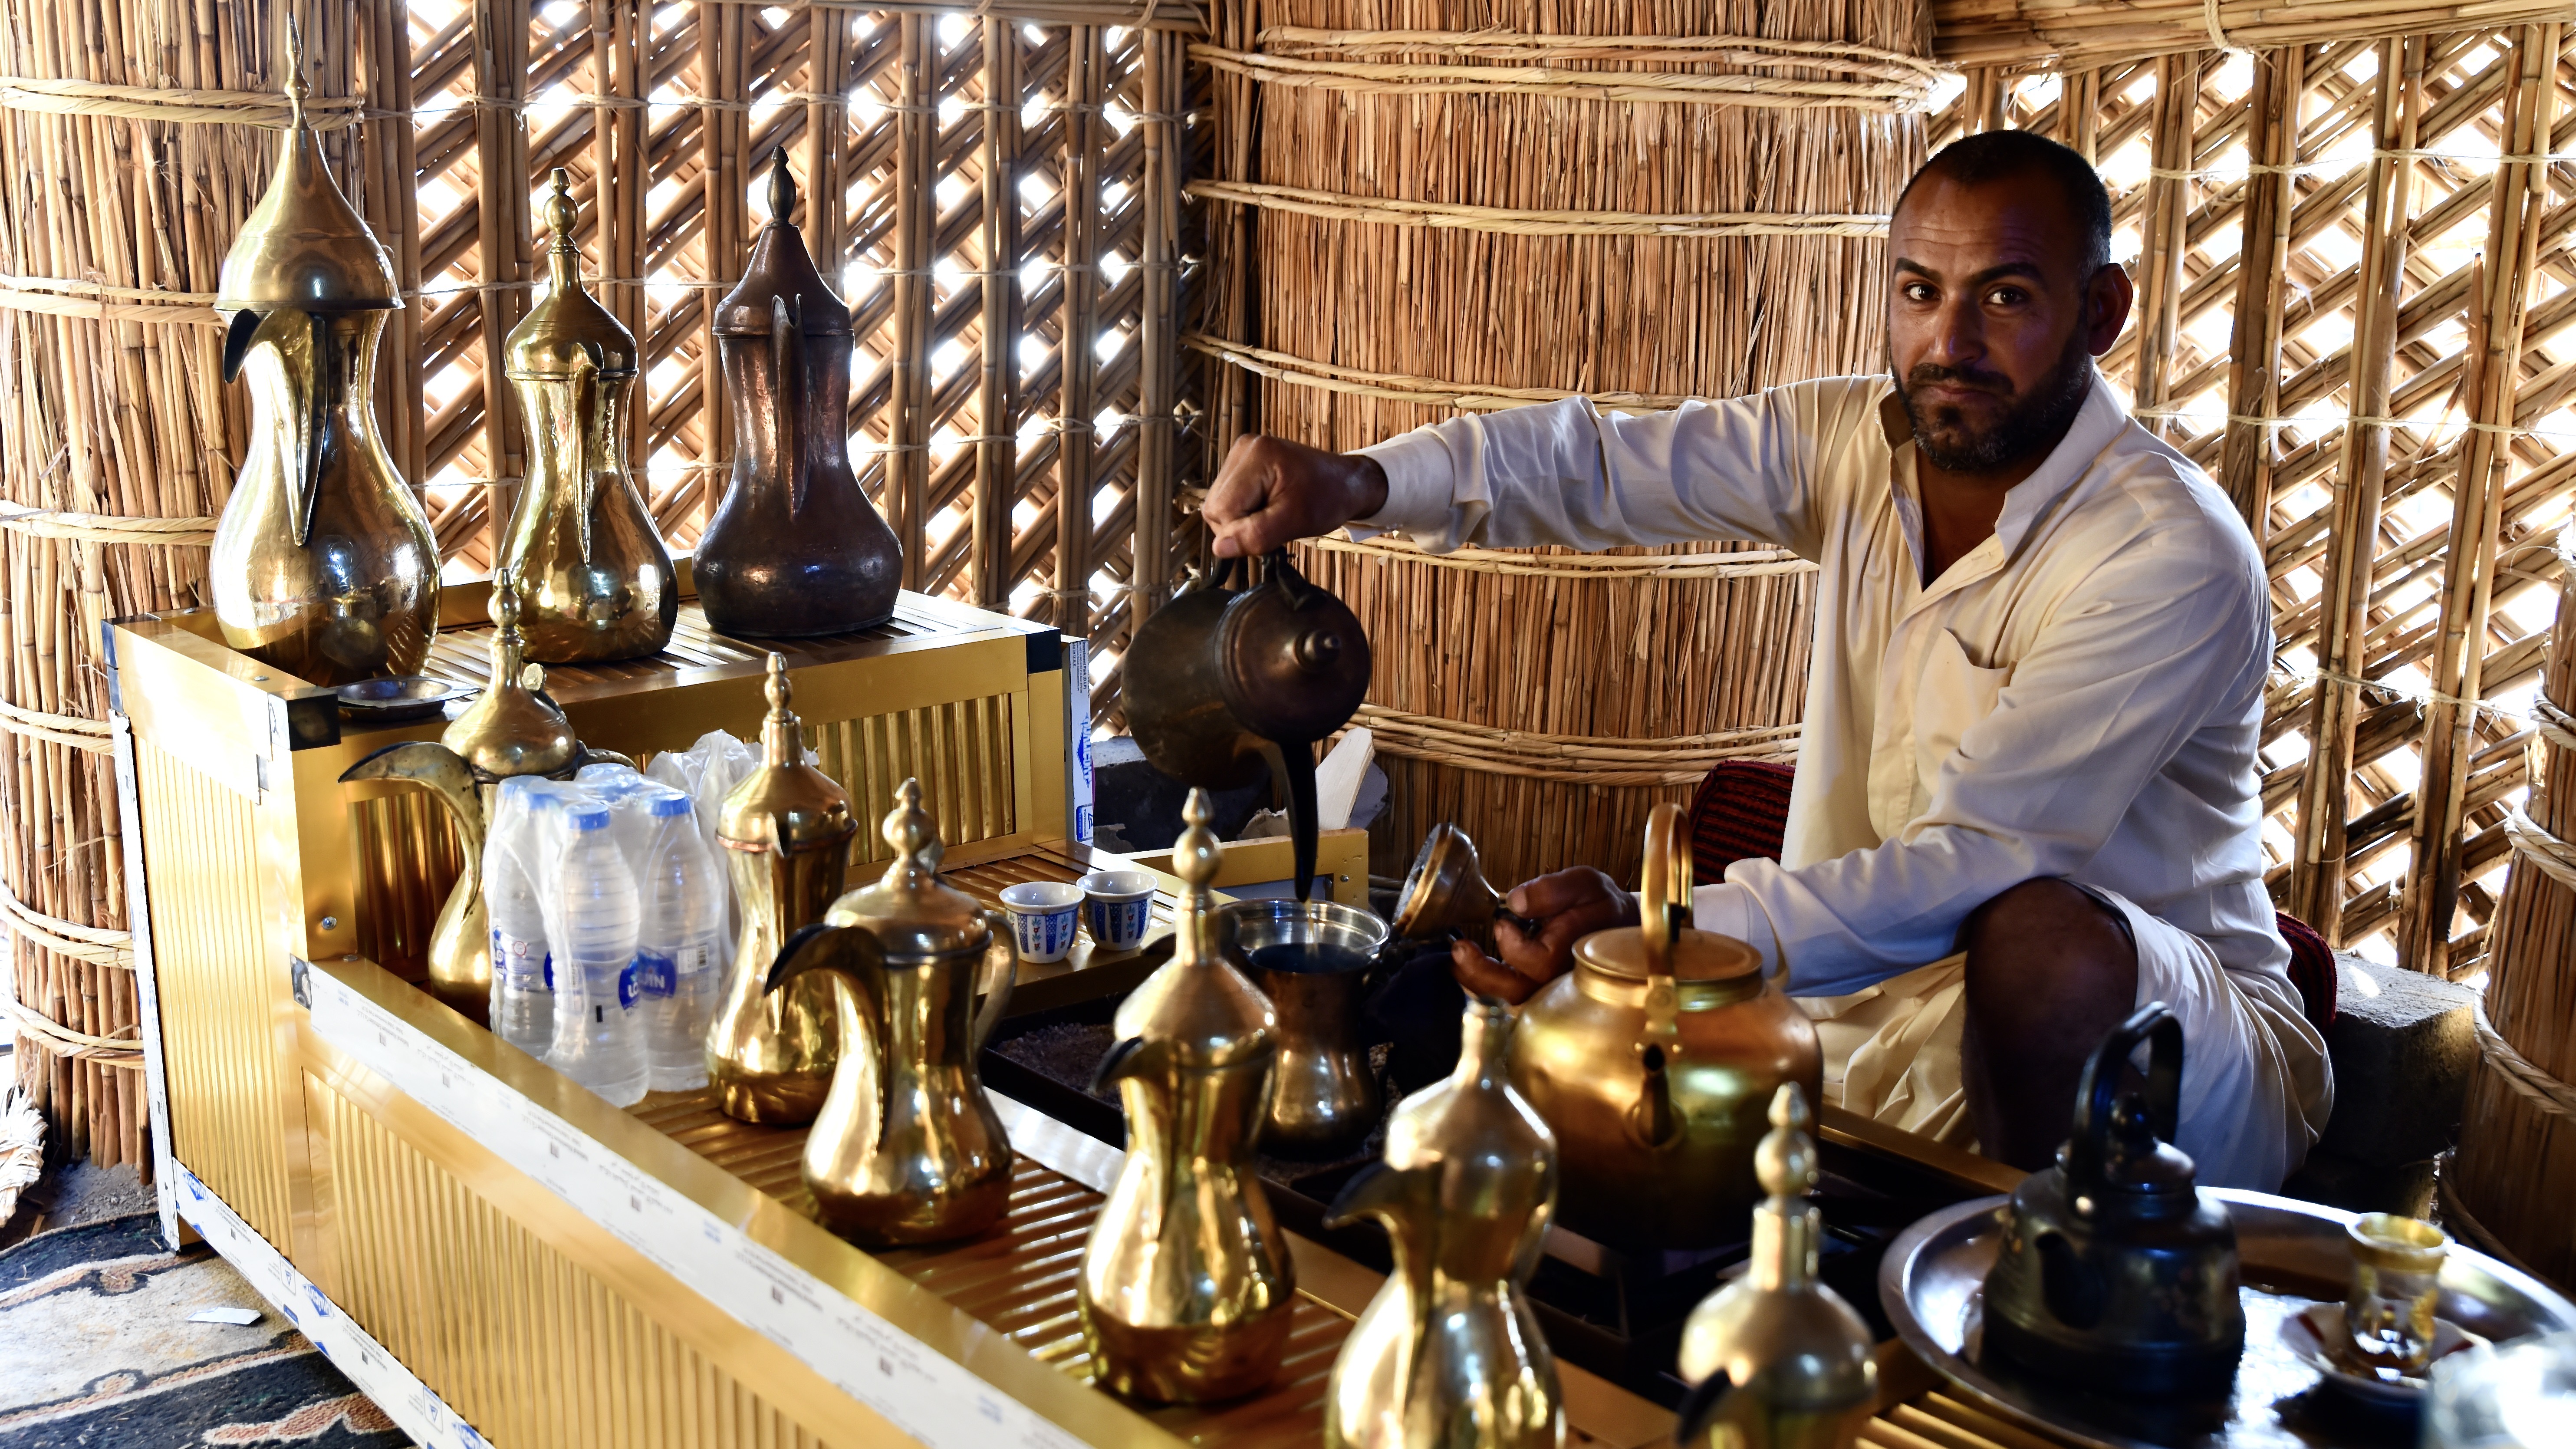 A man pours traditional coffee inside the newly built mudhif